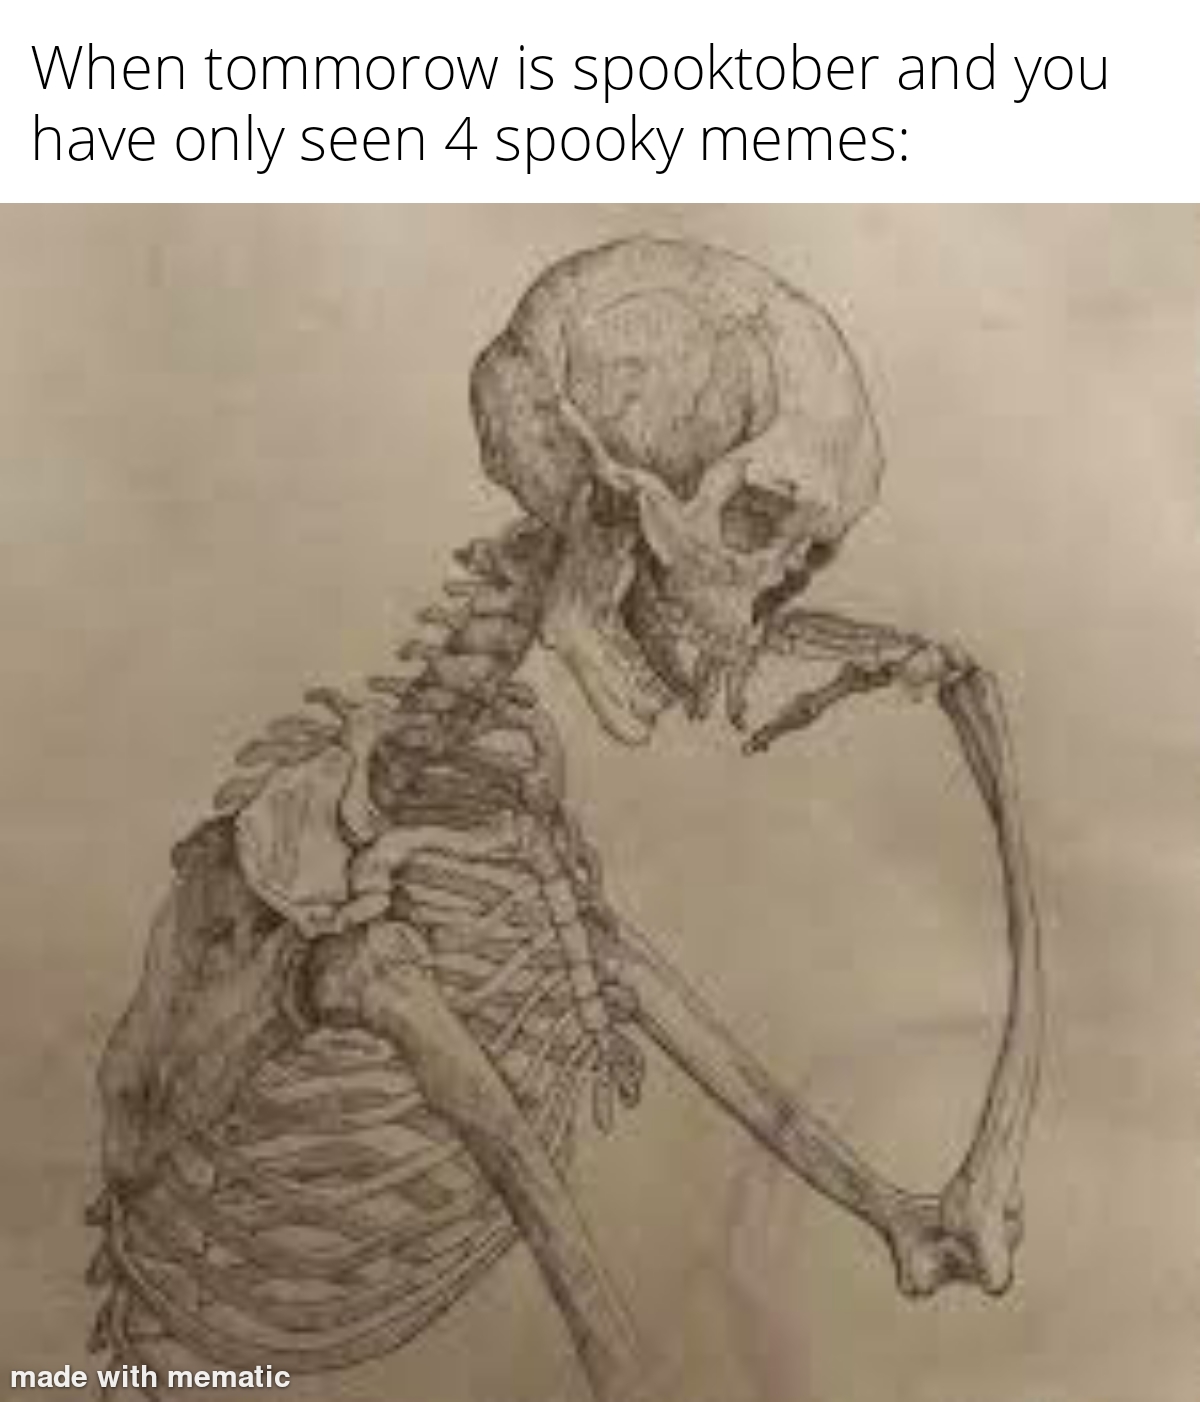 skeleton - When tommorow is spooktober and you have only seen 4 spooky memes made with mematic